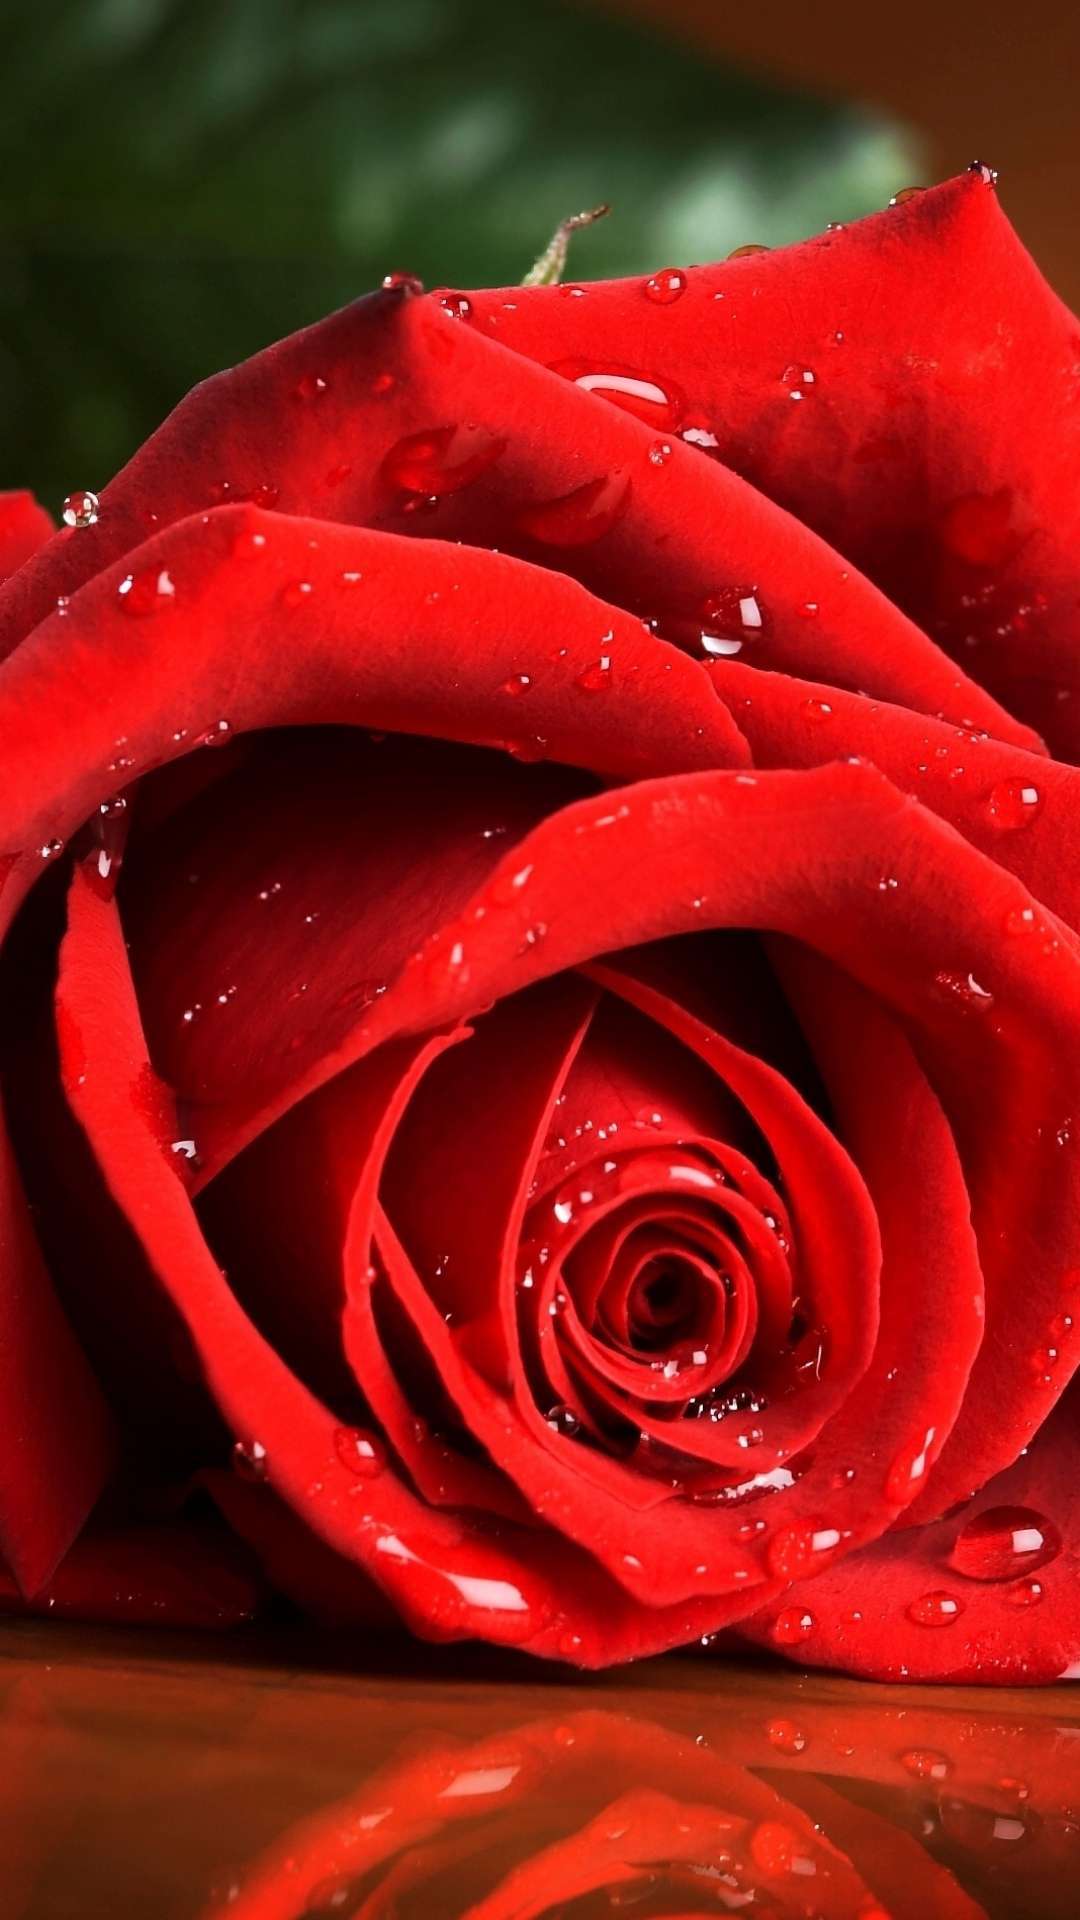 hd wallpaper for mobile 1920x1080,rose,red,garden roses,water,nature